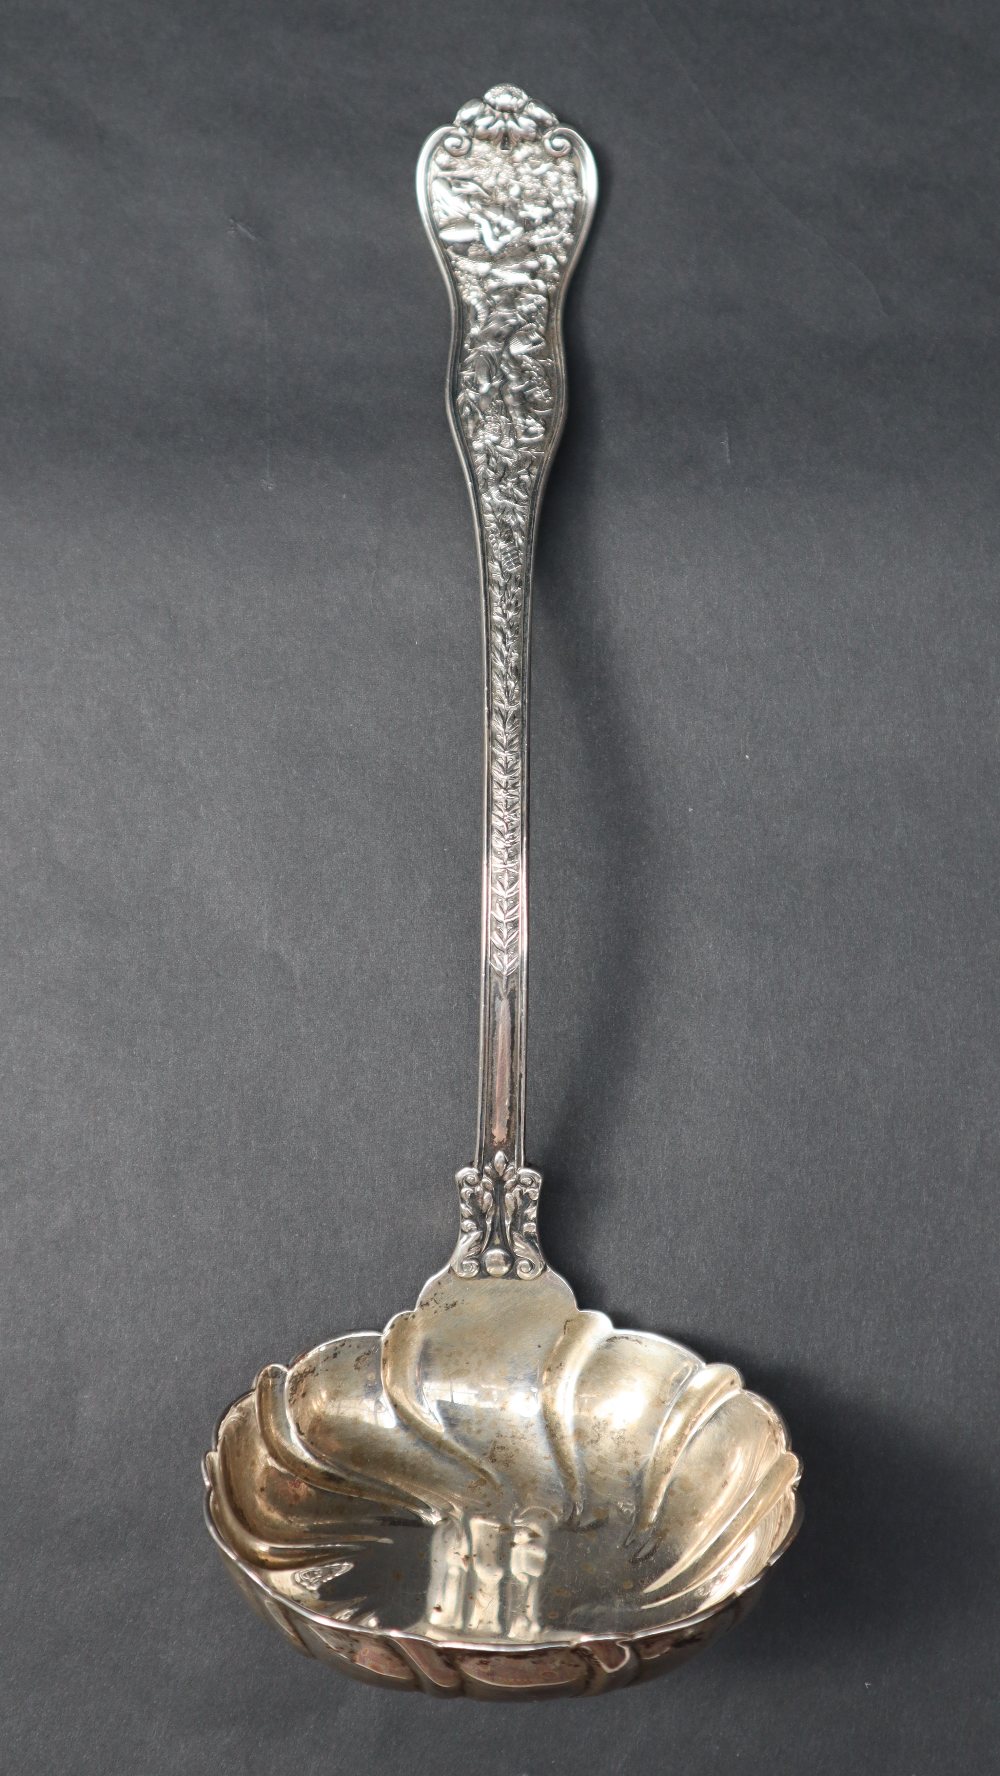 A Tiffany & Co sterling silver Patent 1878 Olympian pattern soup ladle, - Image 2 of 8